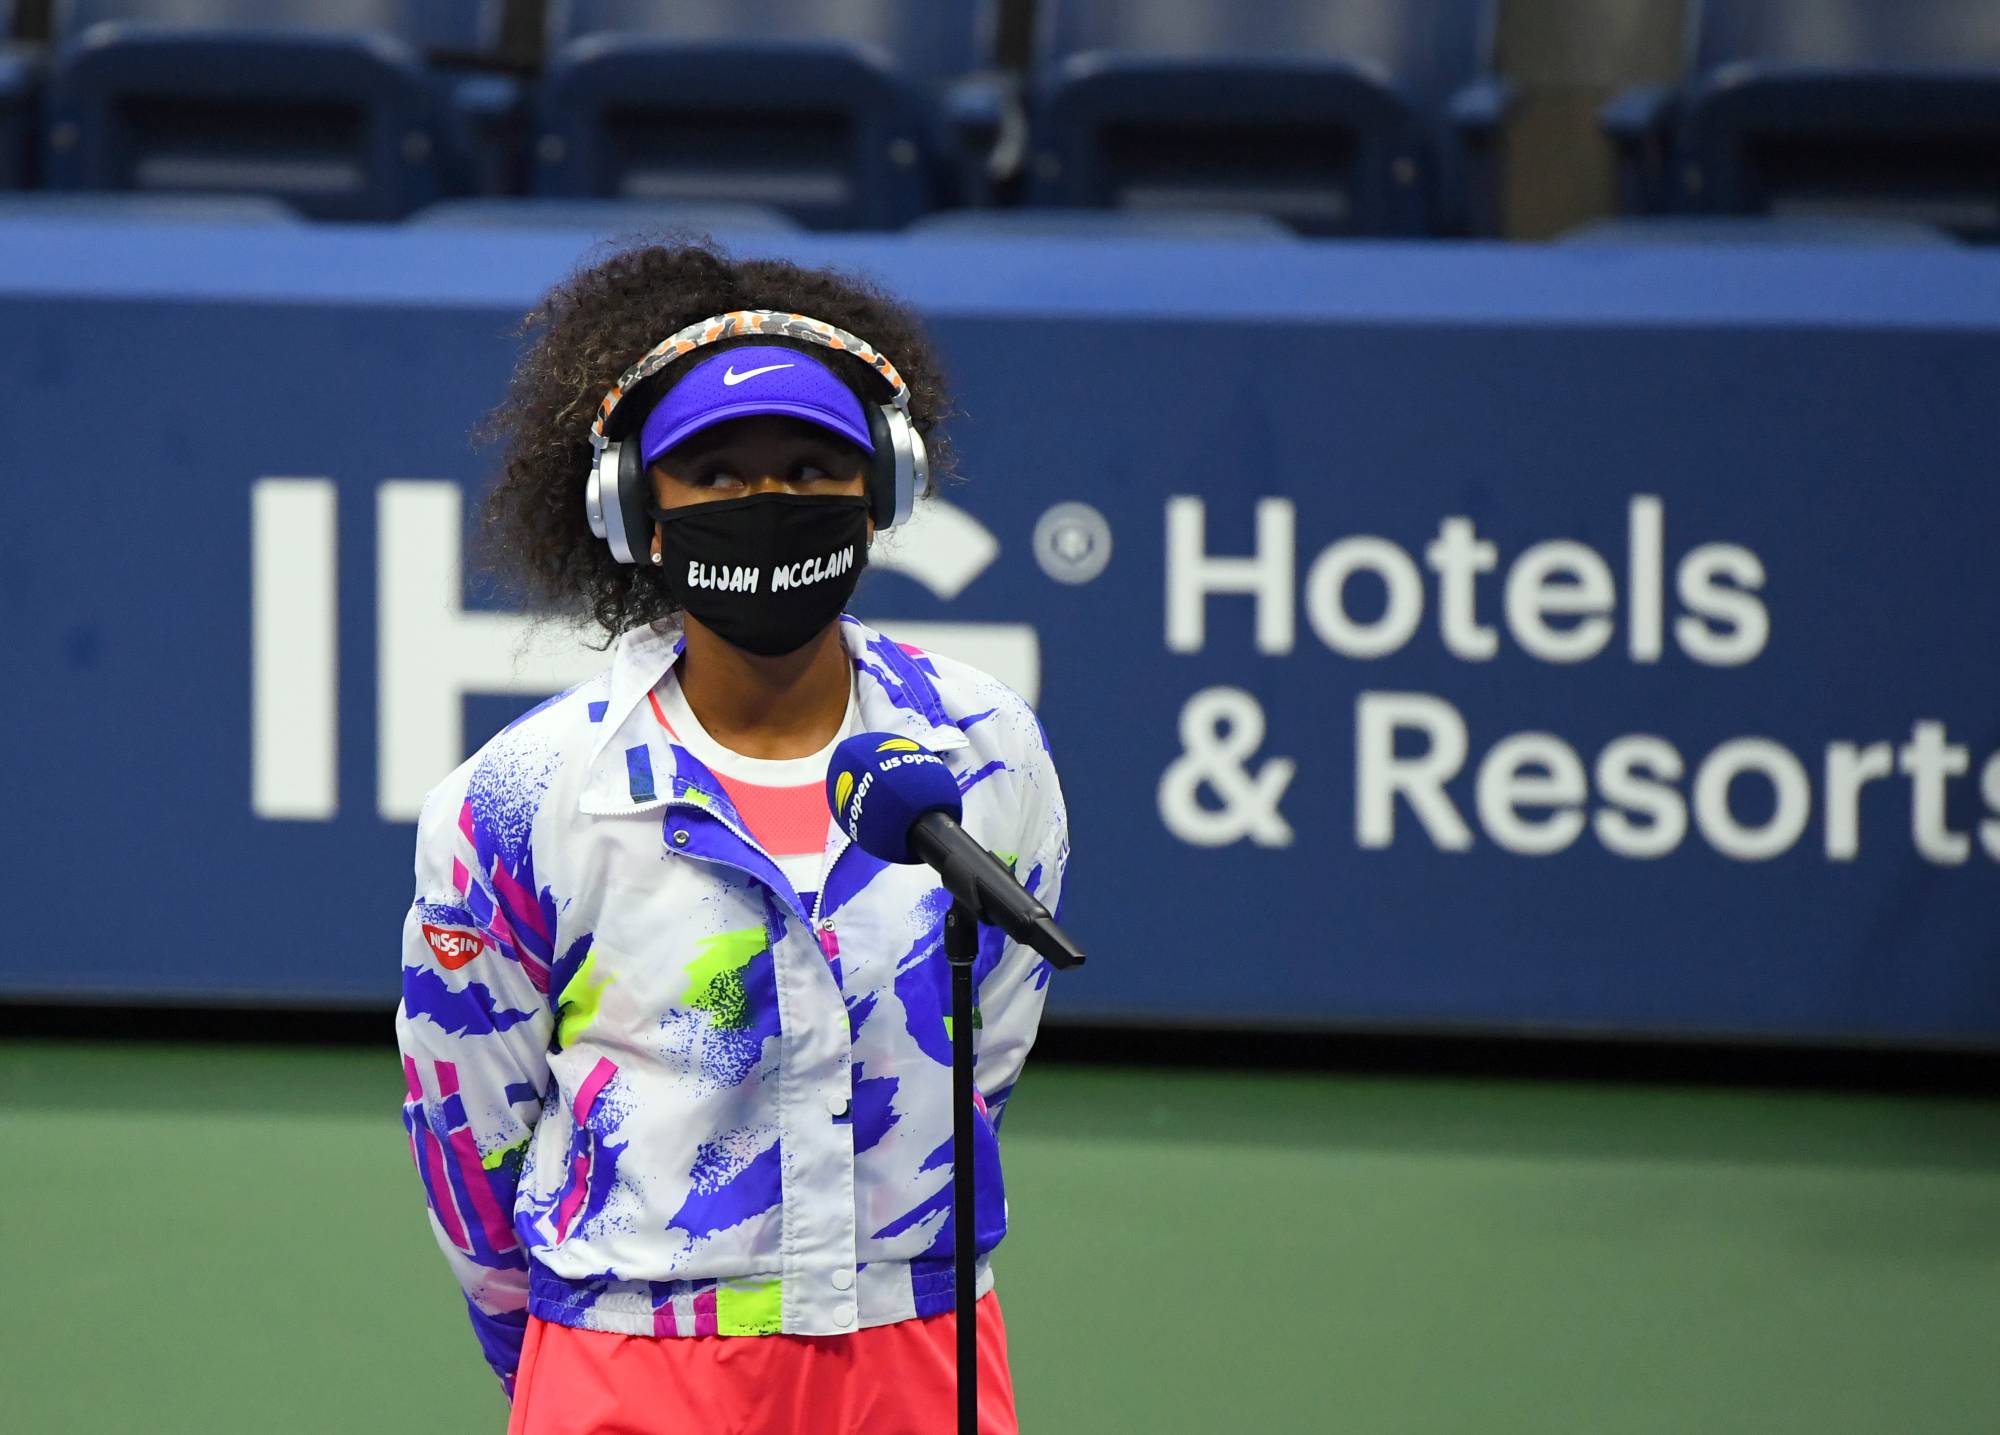 No masking the meaning: Naomi Osaka speaks to the press while wearing a face mask with the name of Elijah McClain written on it. McClain was 23 when he died after being placed in a chokehold by police in Aurora, Colorado, and administered a sedative by paramedics.  | REUTERS